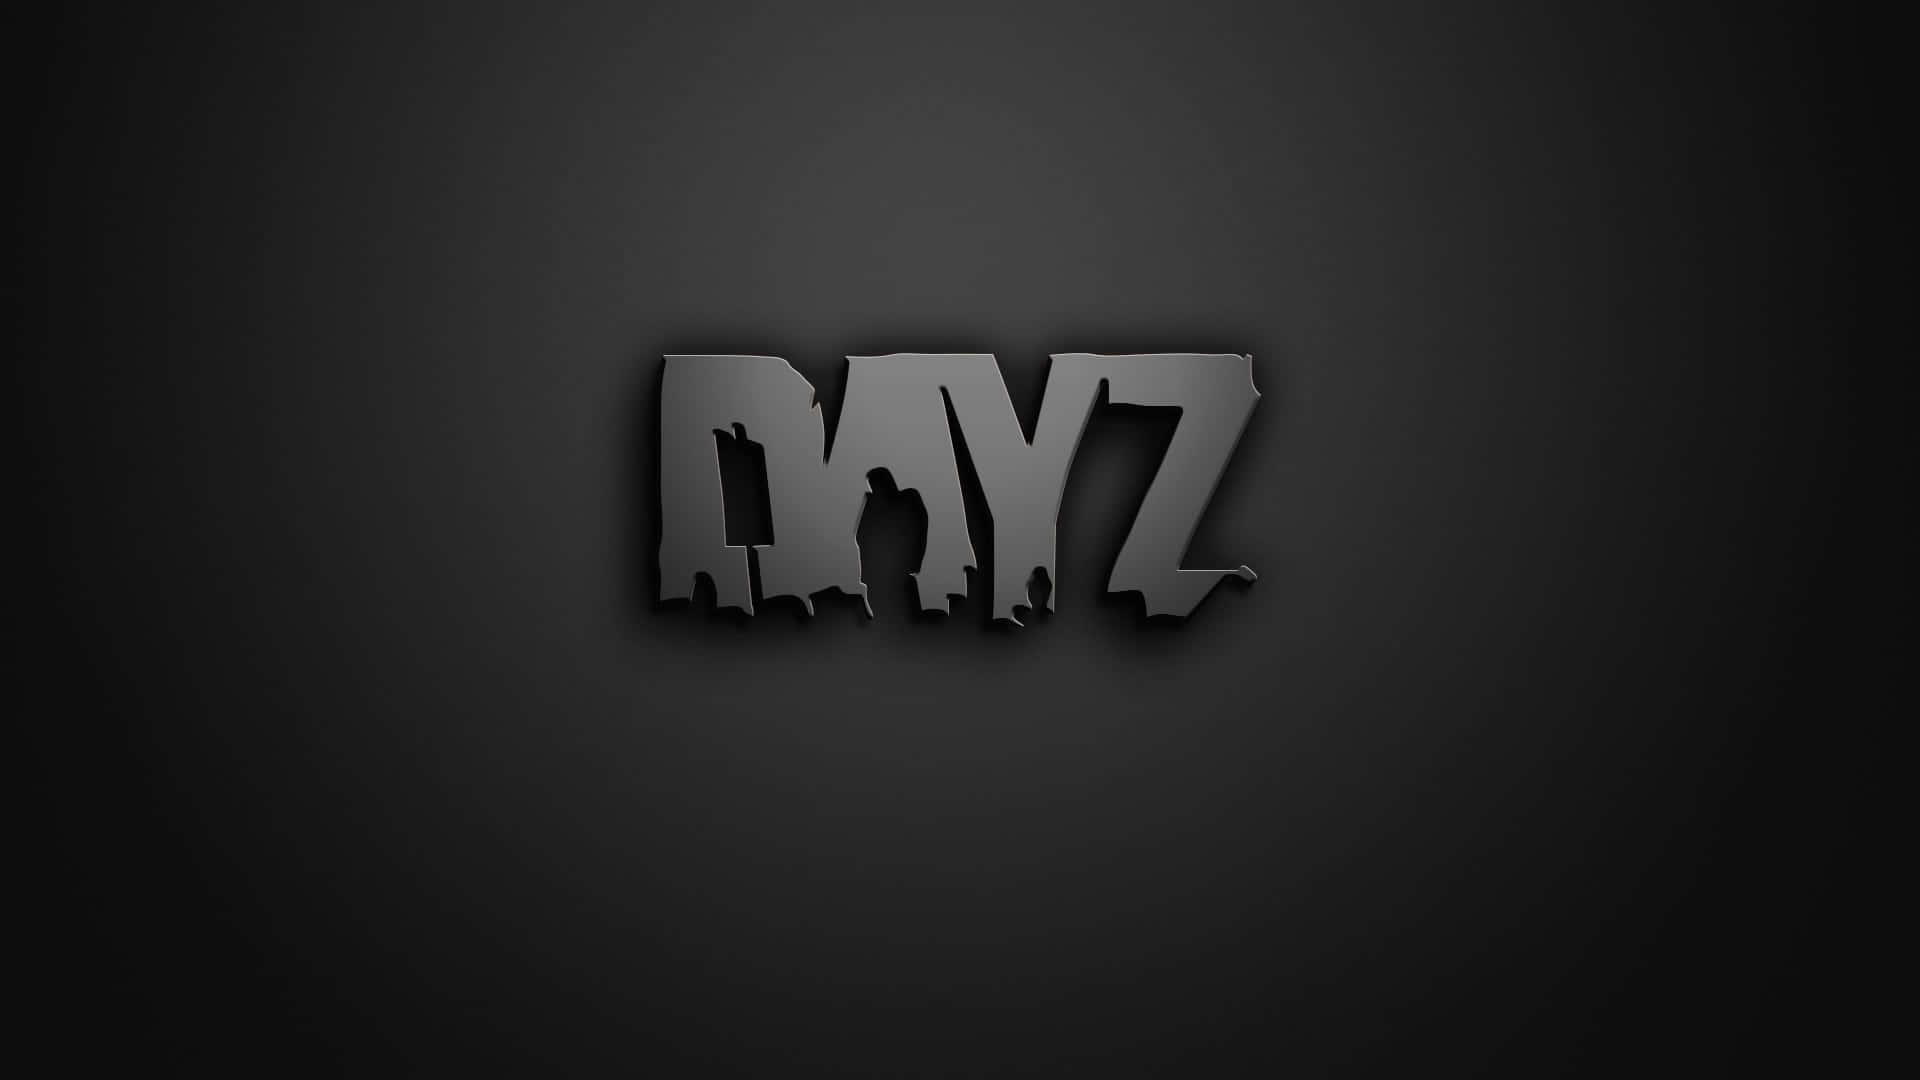 A Black Background With The Word Dayz On It